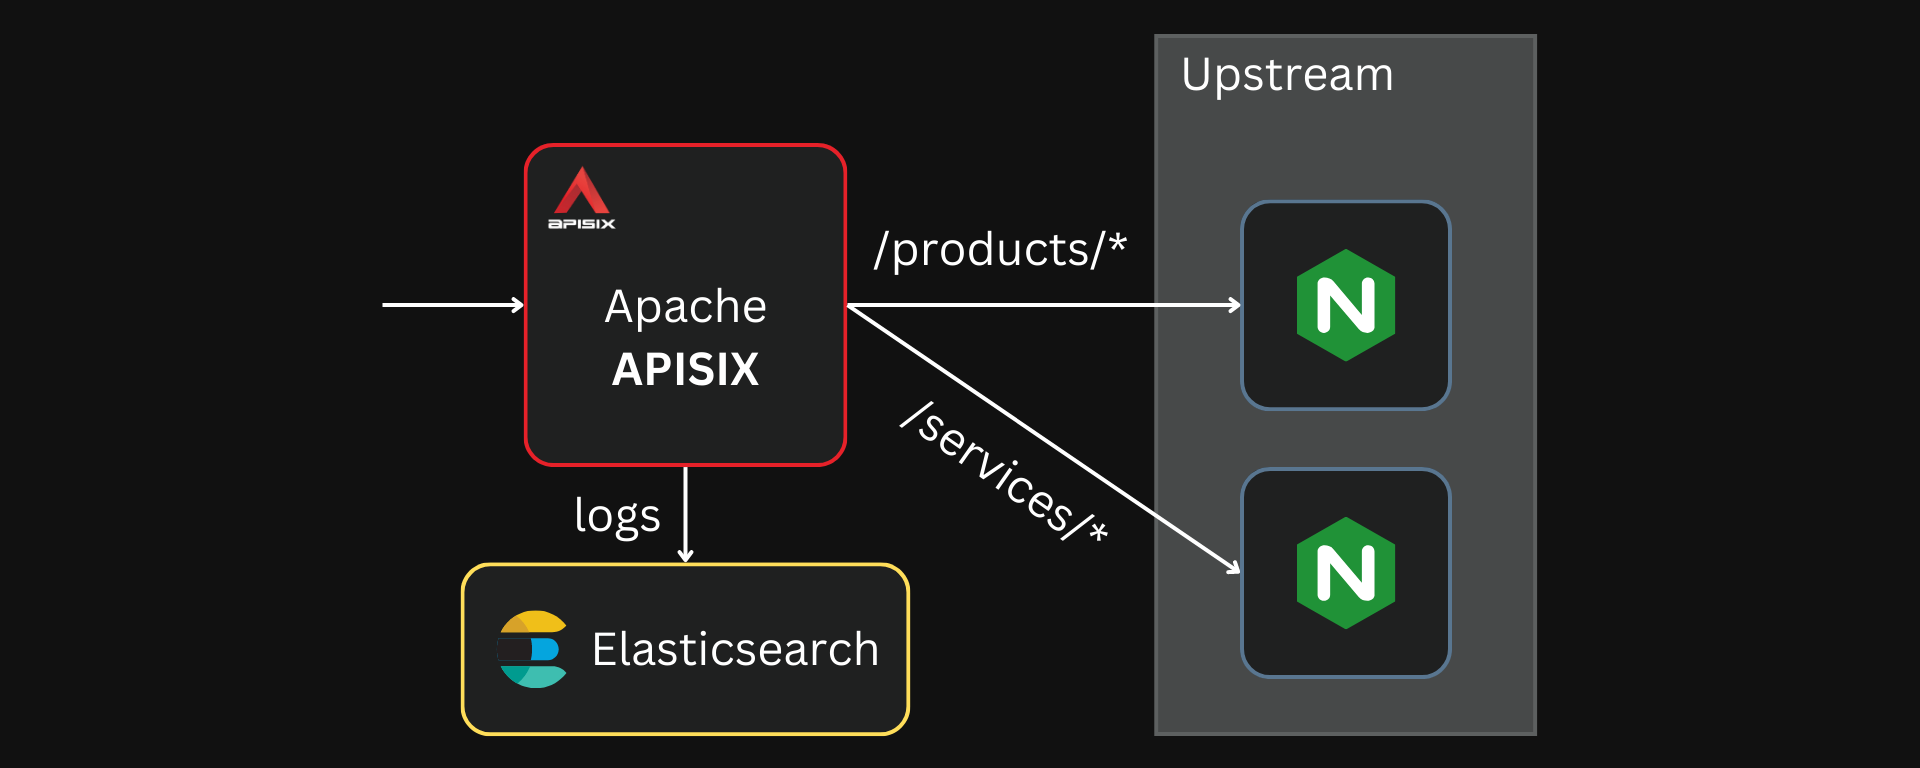 Sample system with two upstream services, APISIX, and Elasticsearch